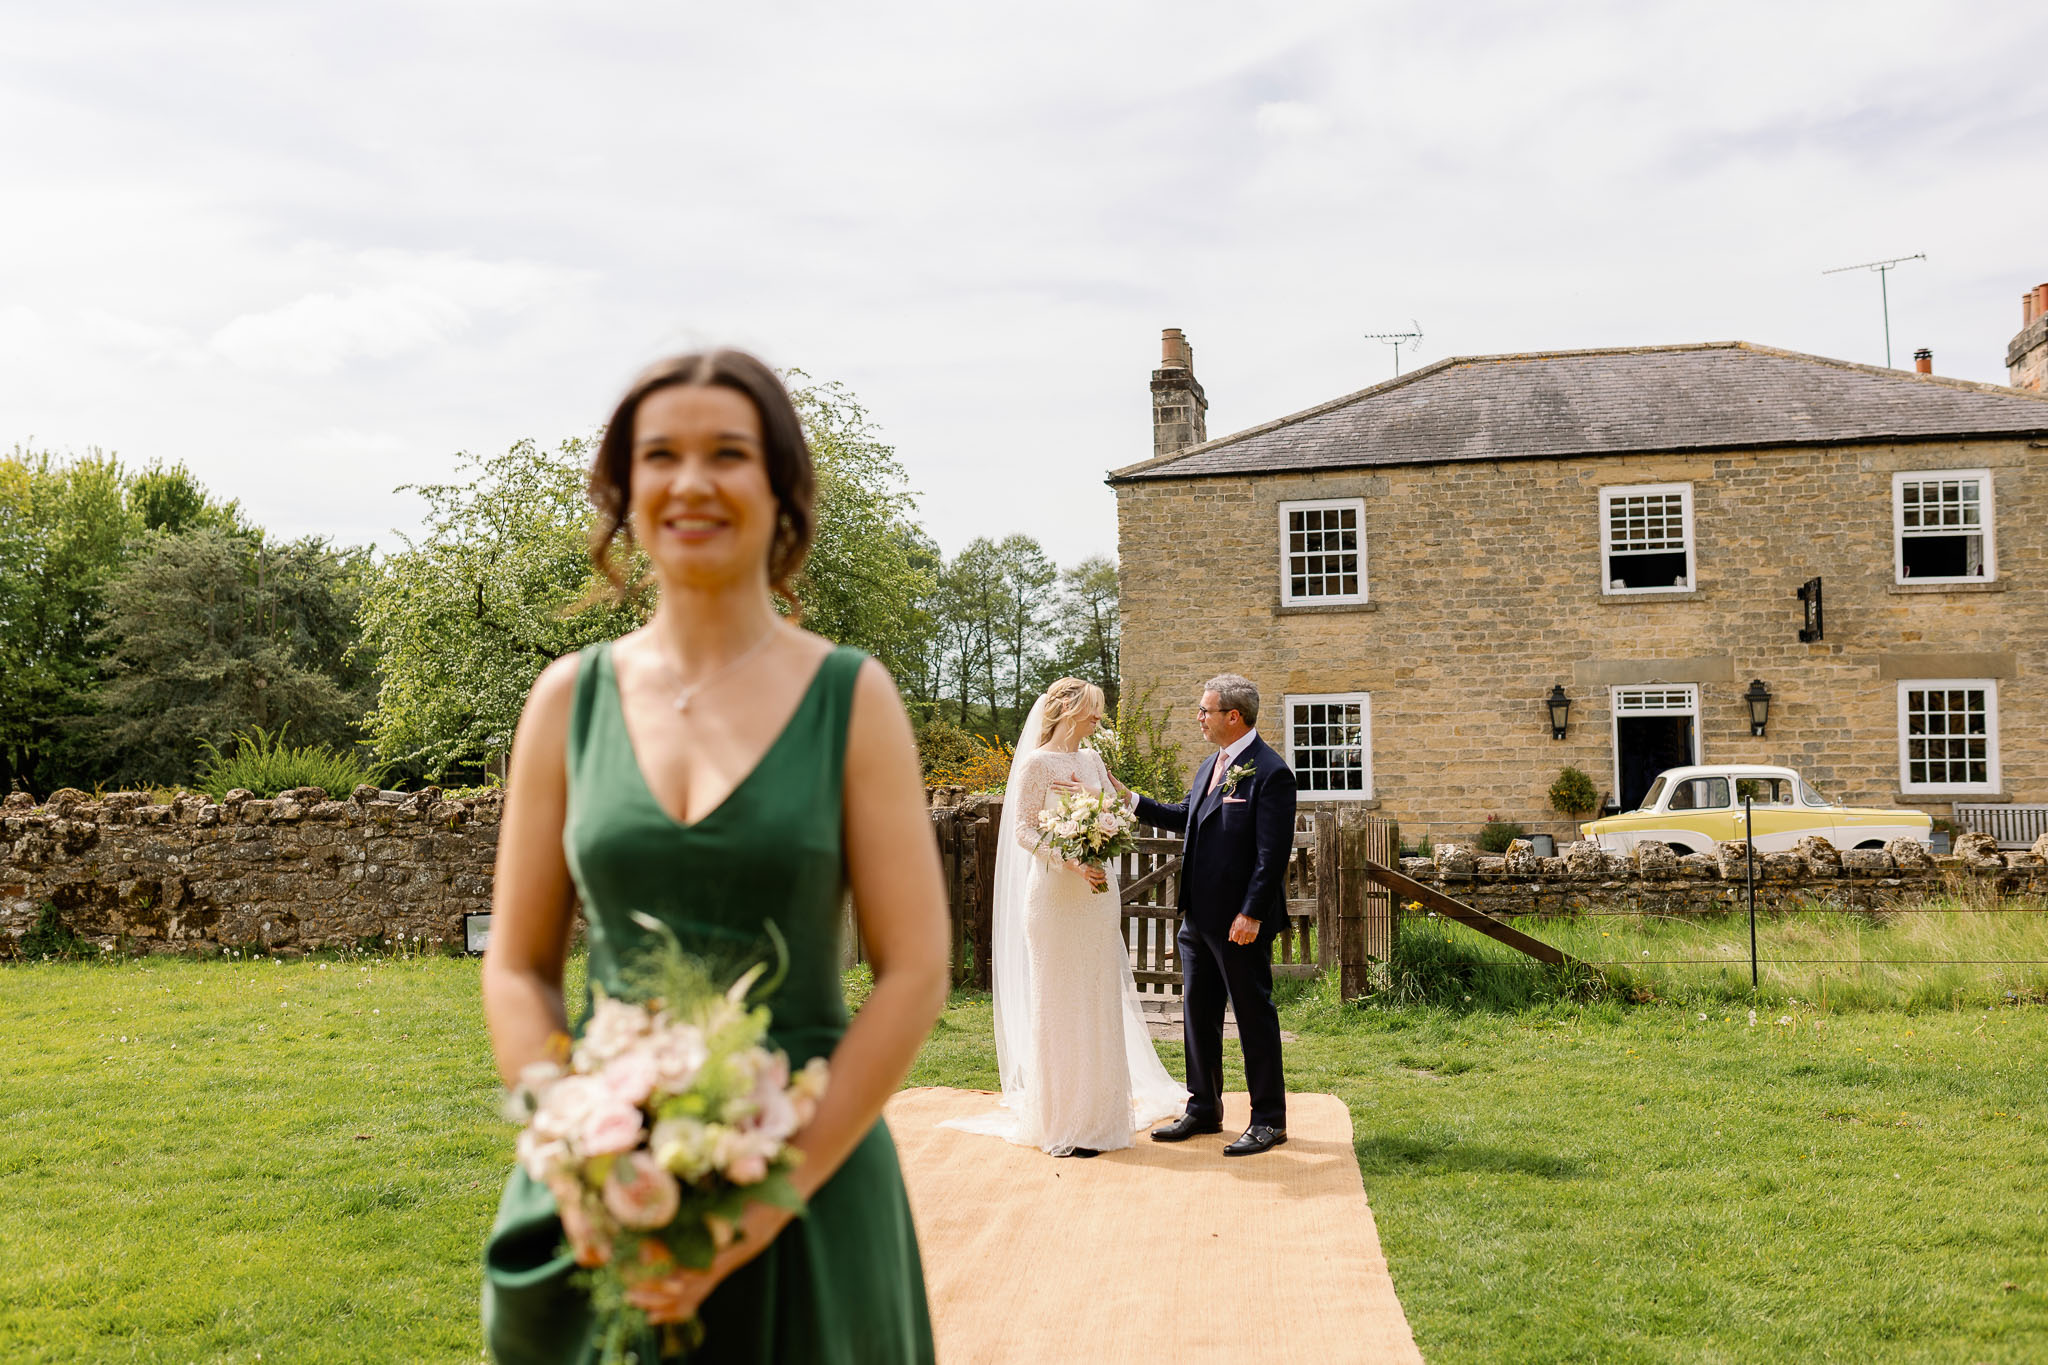 Great locations to get married outdoors in York 